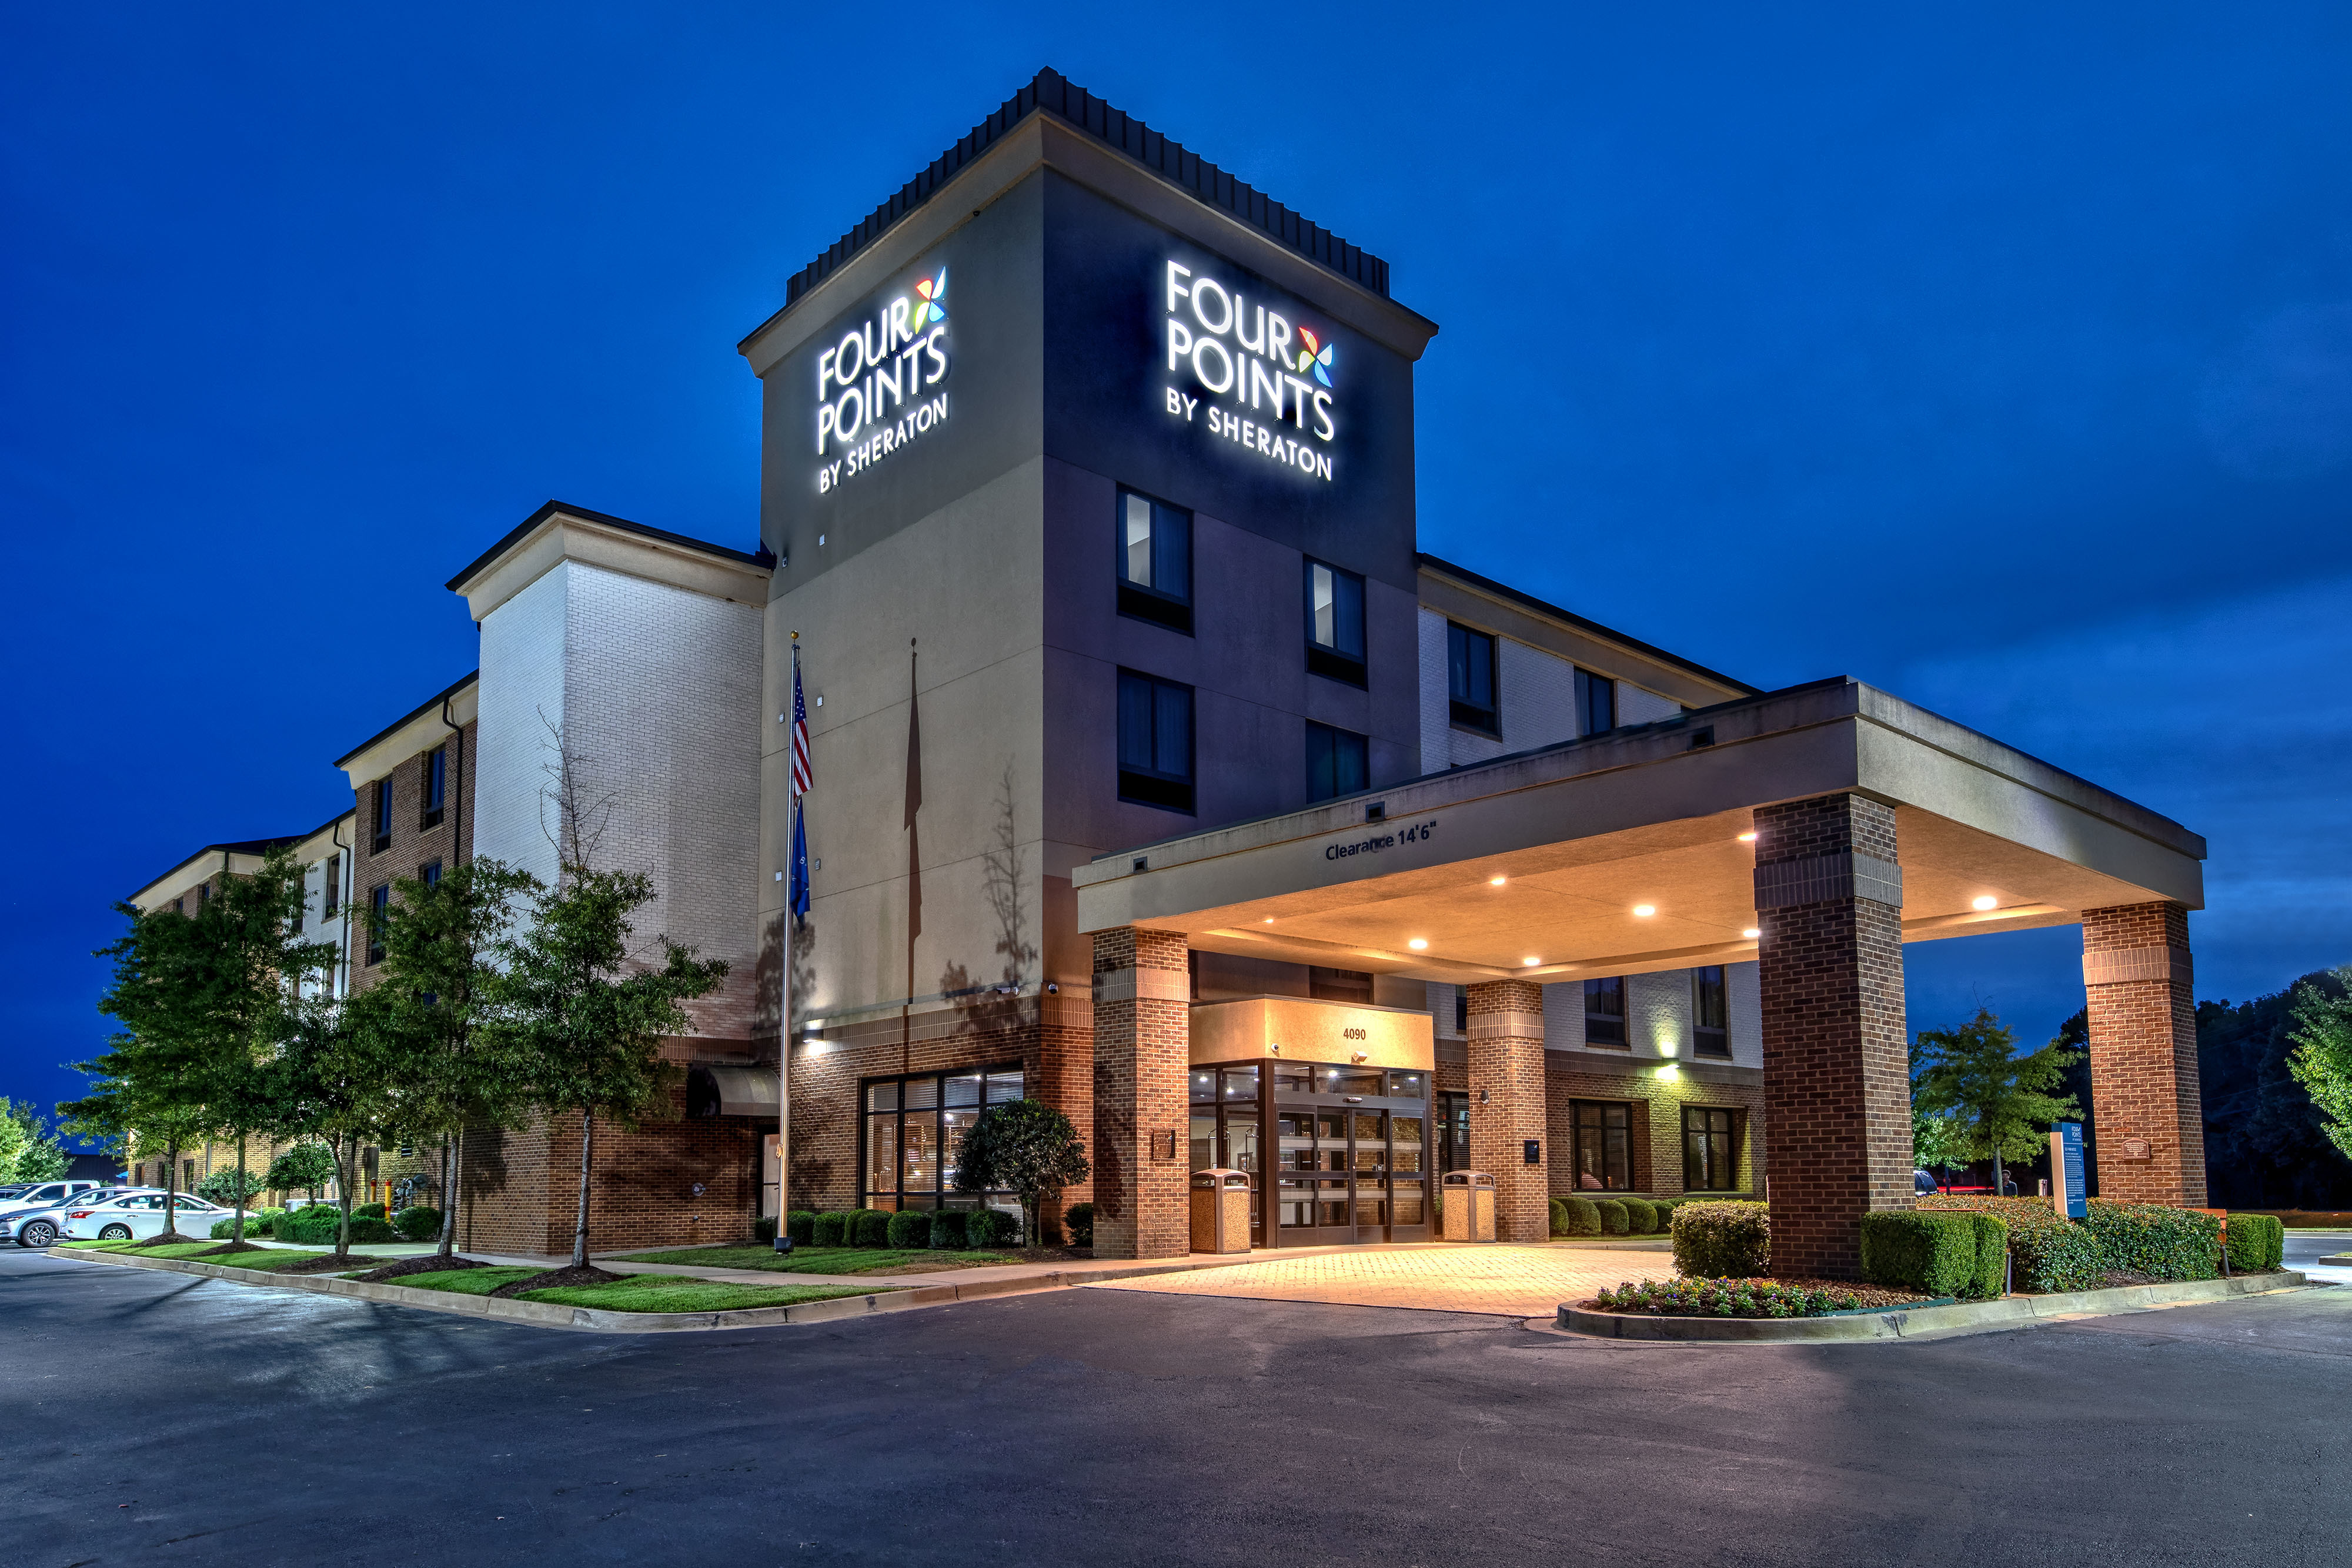 Photo of Four Points by Sheraton Memphis - Southwind, Memphis, TN